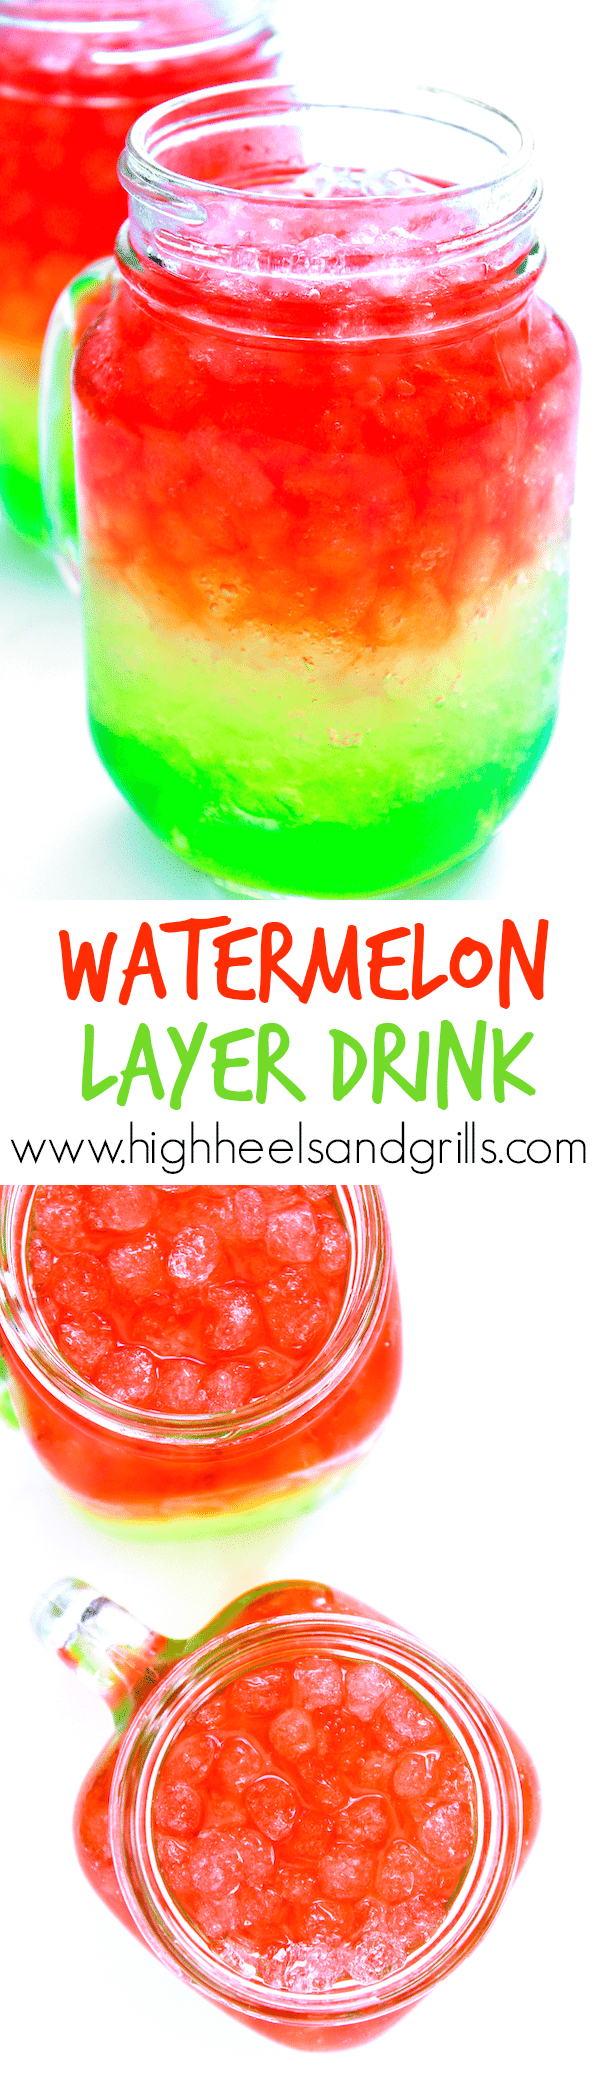 Watermelon Layer Drink - Such a cute, summery drink! Would be great for a watermelon themed party.